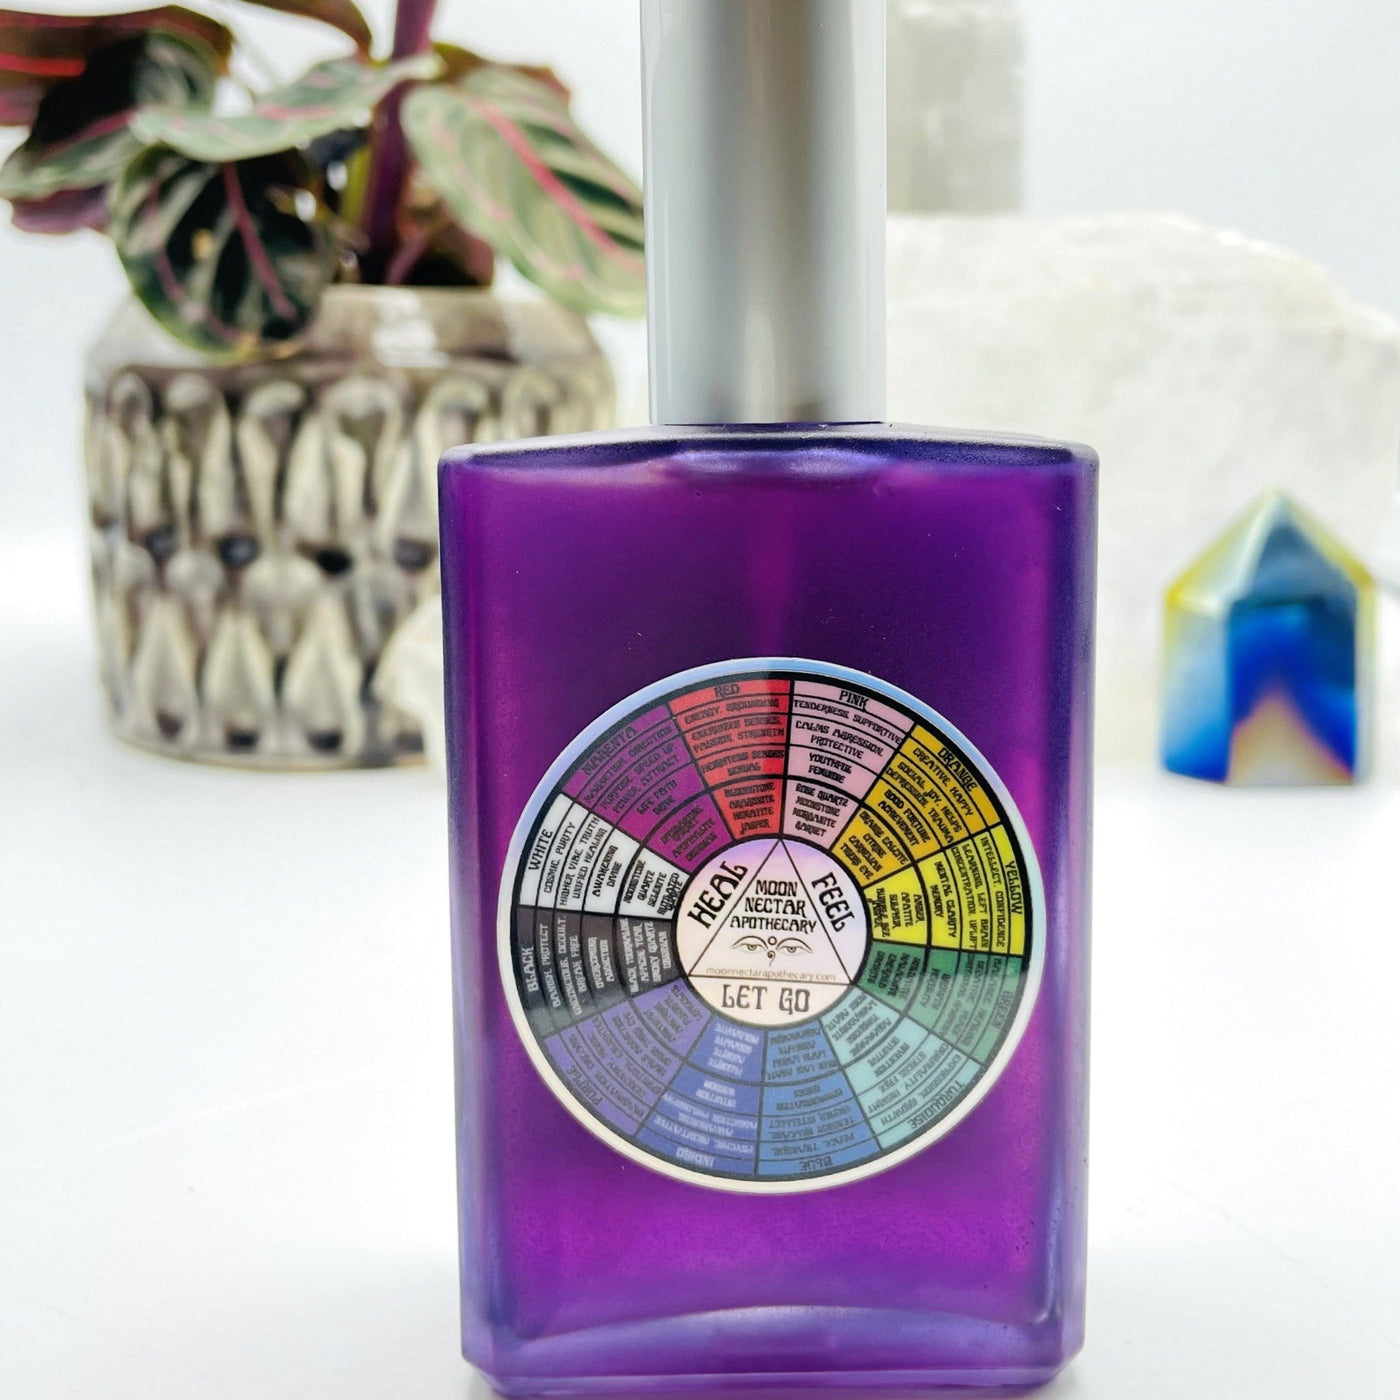 back view of Gemstone Mist - Violet Vibrational Color with decorations in the background